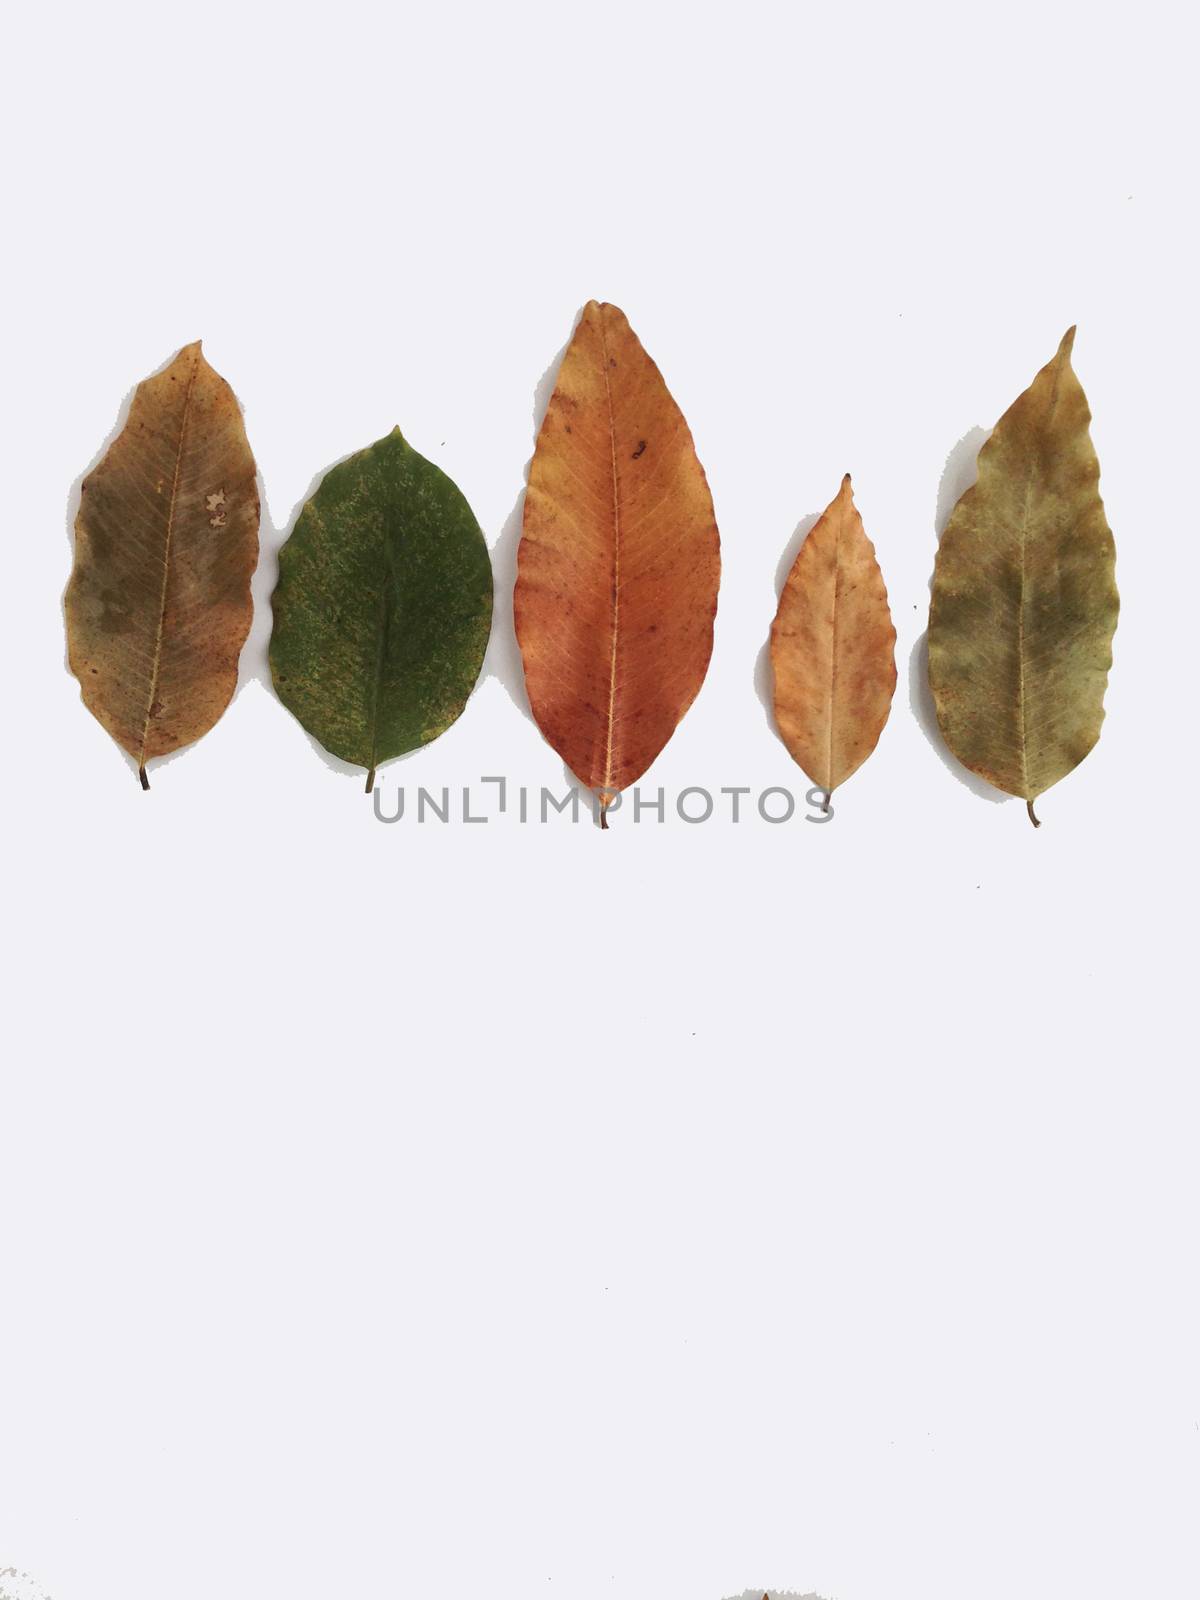 Dry leaves on white background, free space for text